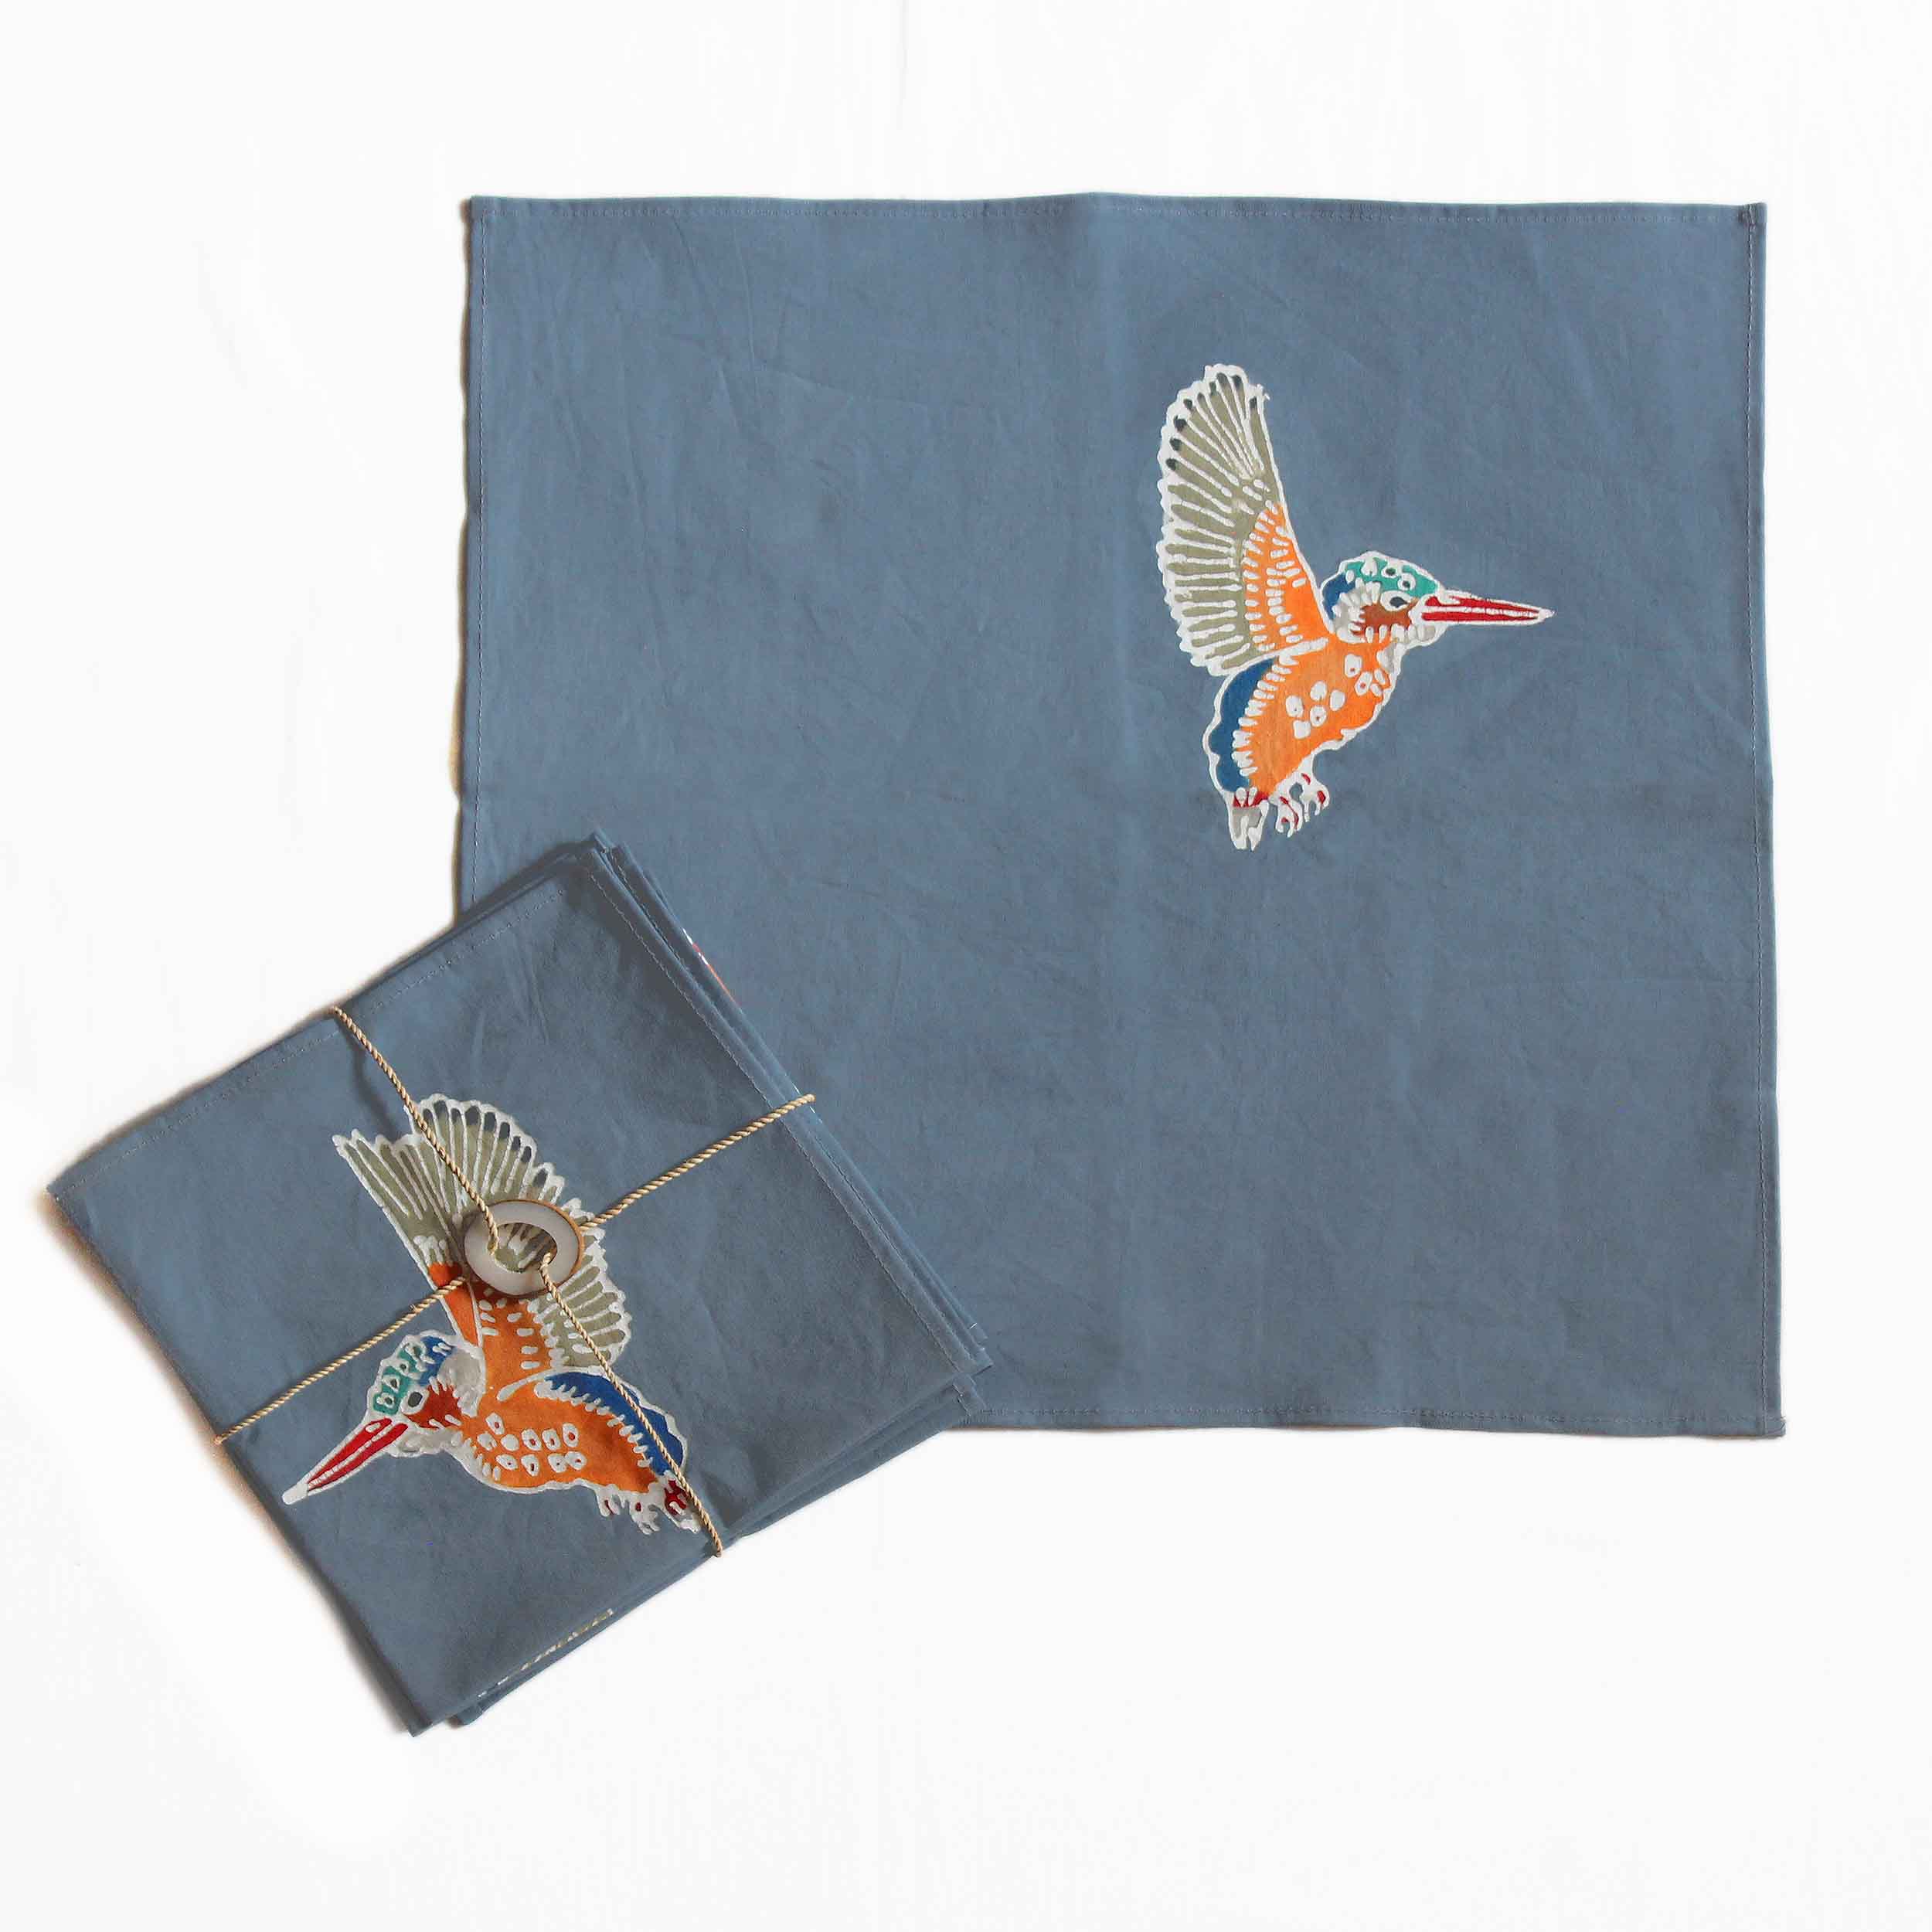 Papiko Malachite Kingfisher Napkin Set - Hand Painted by TRIBAL TEXTILES - Handcrafted Home Decor Interiors - African Made